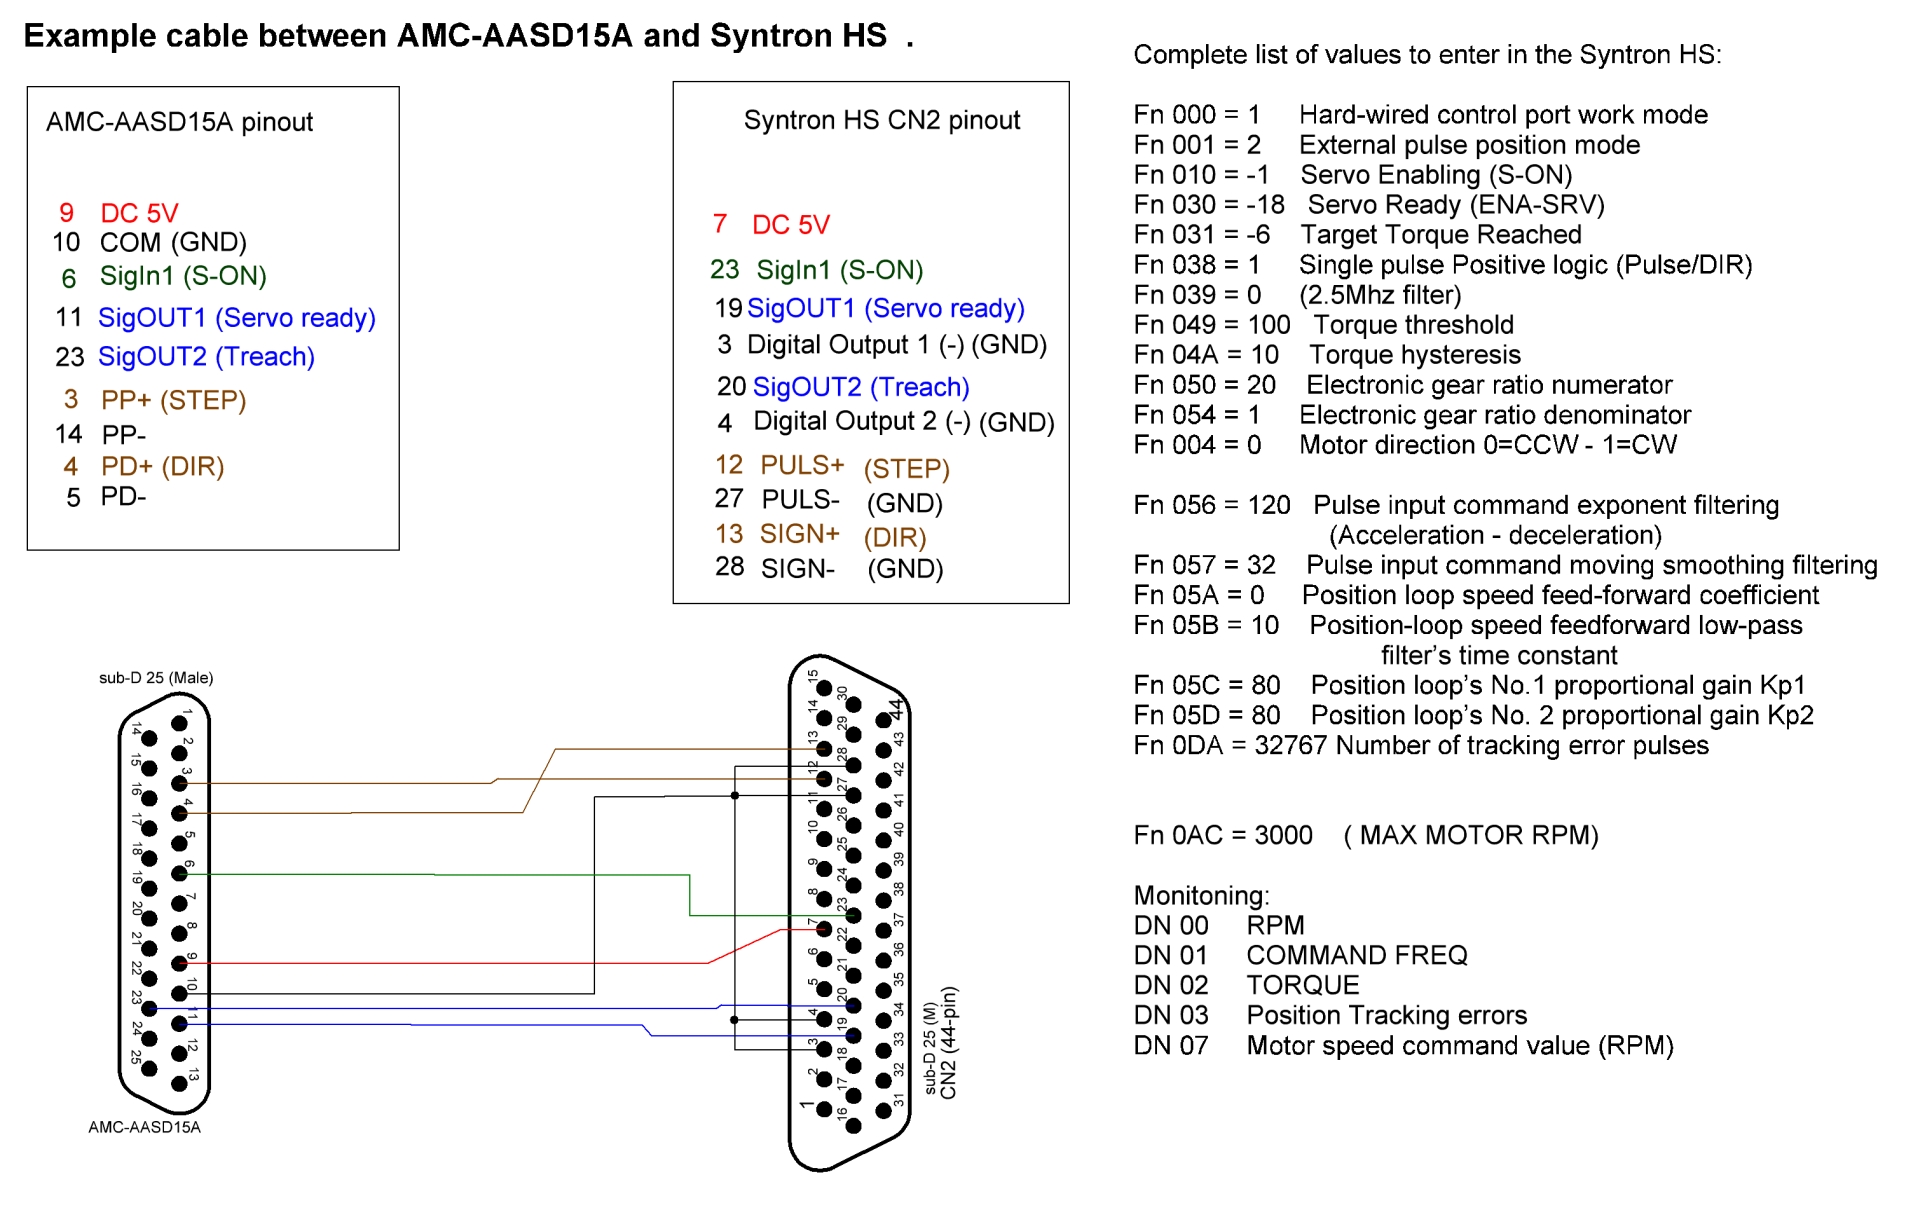 AMC-AASD15A - Syntron HS connections schematic_sm.jpg